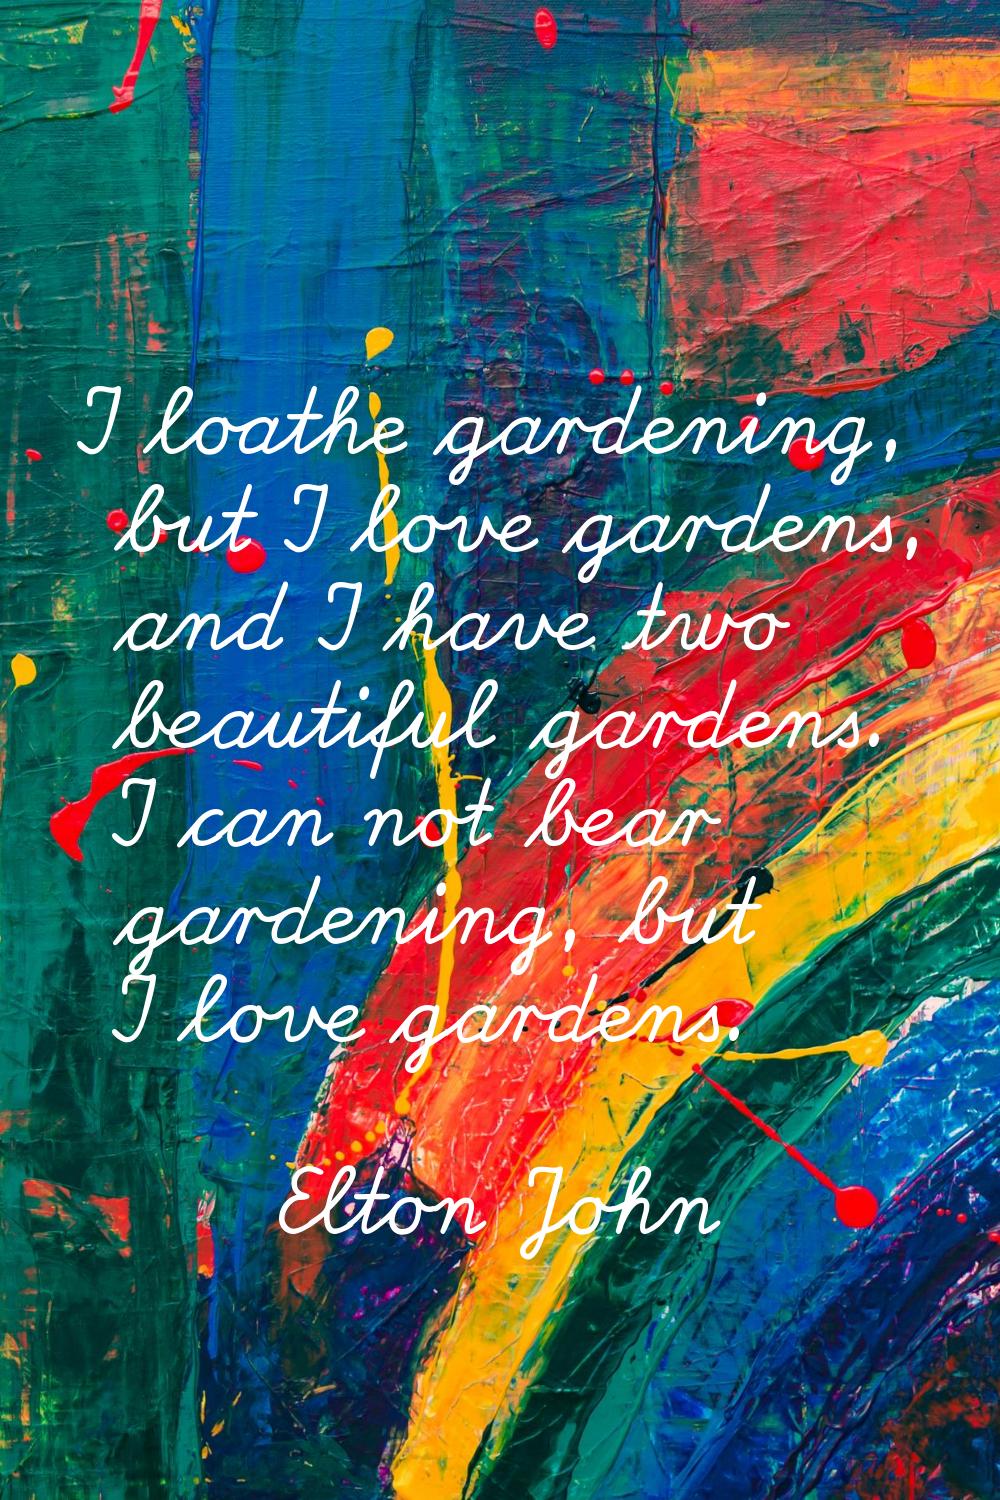 I loathe gardening, but I love gardens, and I have two beautiful gardens. I can not bear gardening,